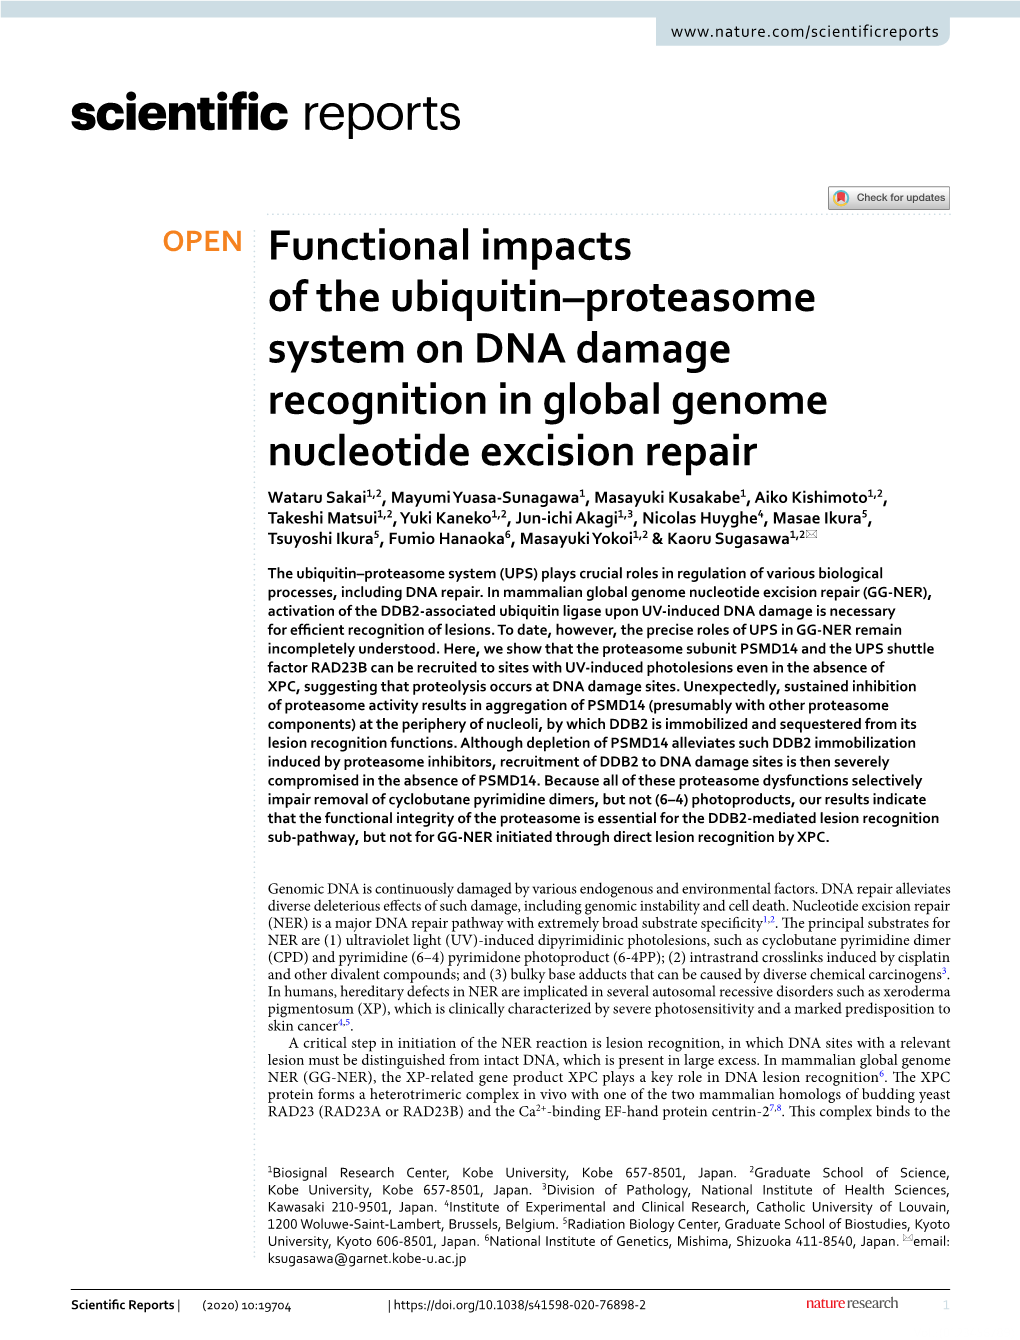 Functional Impacts of the Ubiquitin–Proteasome System on DNA